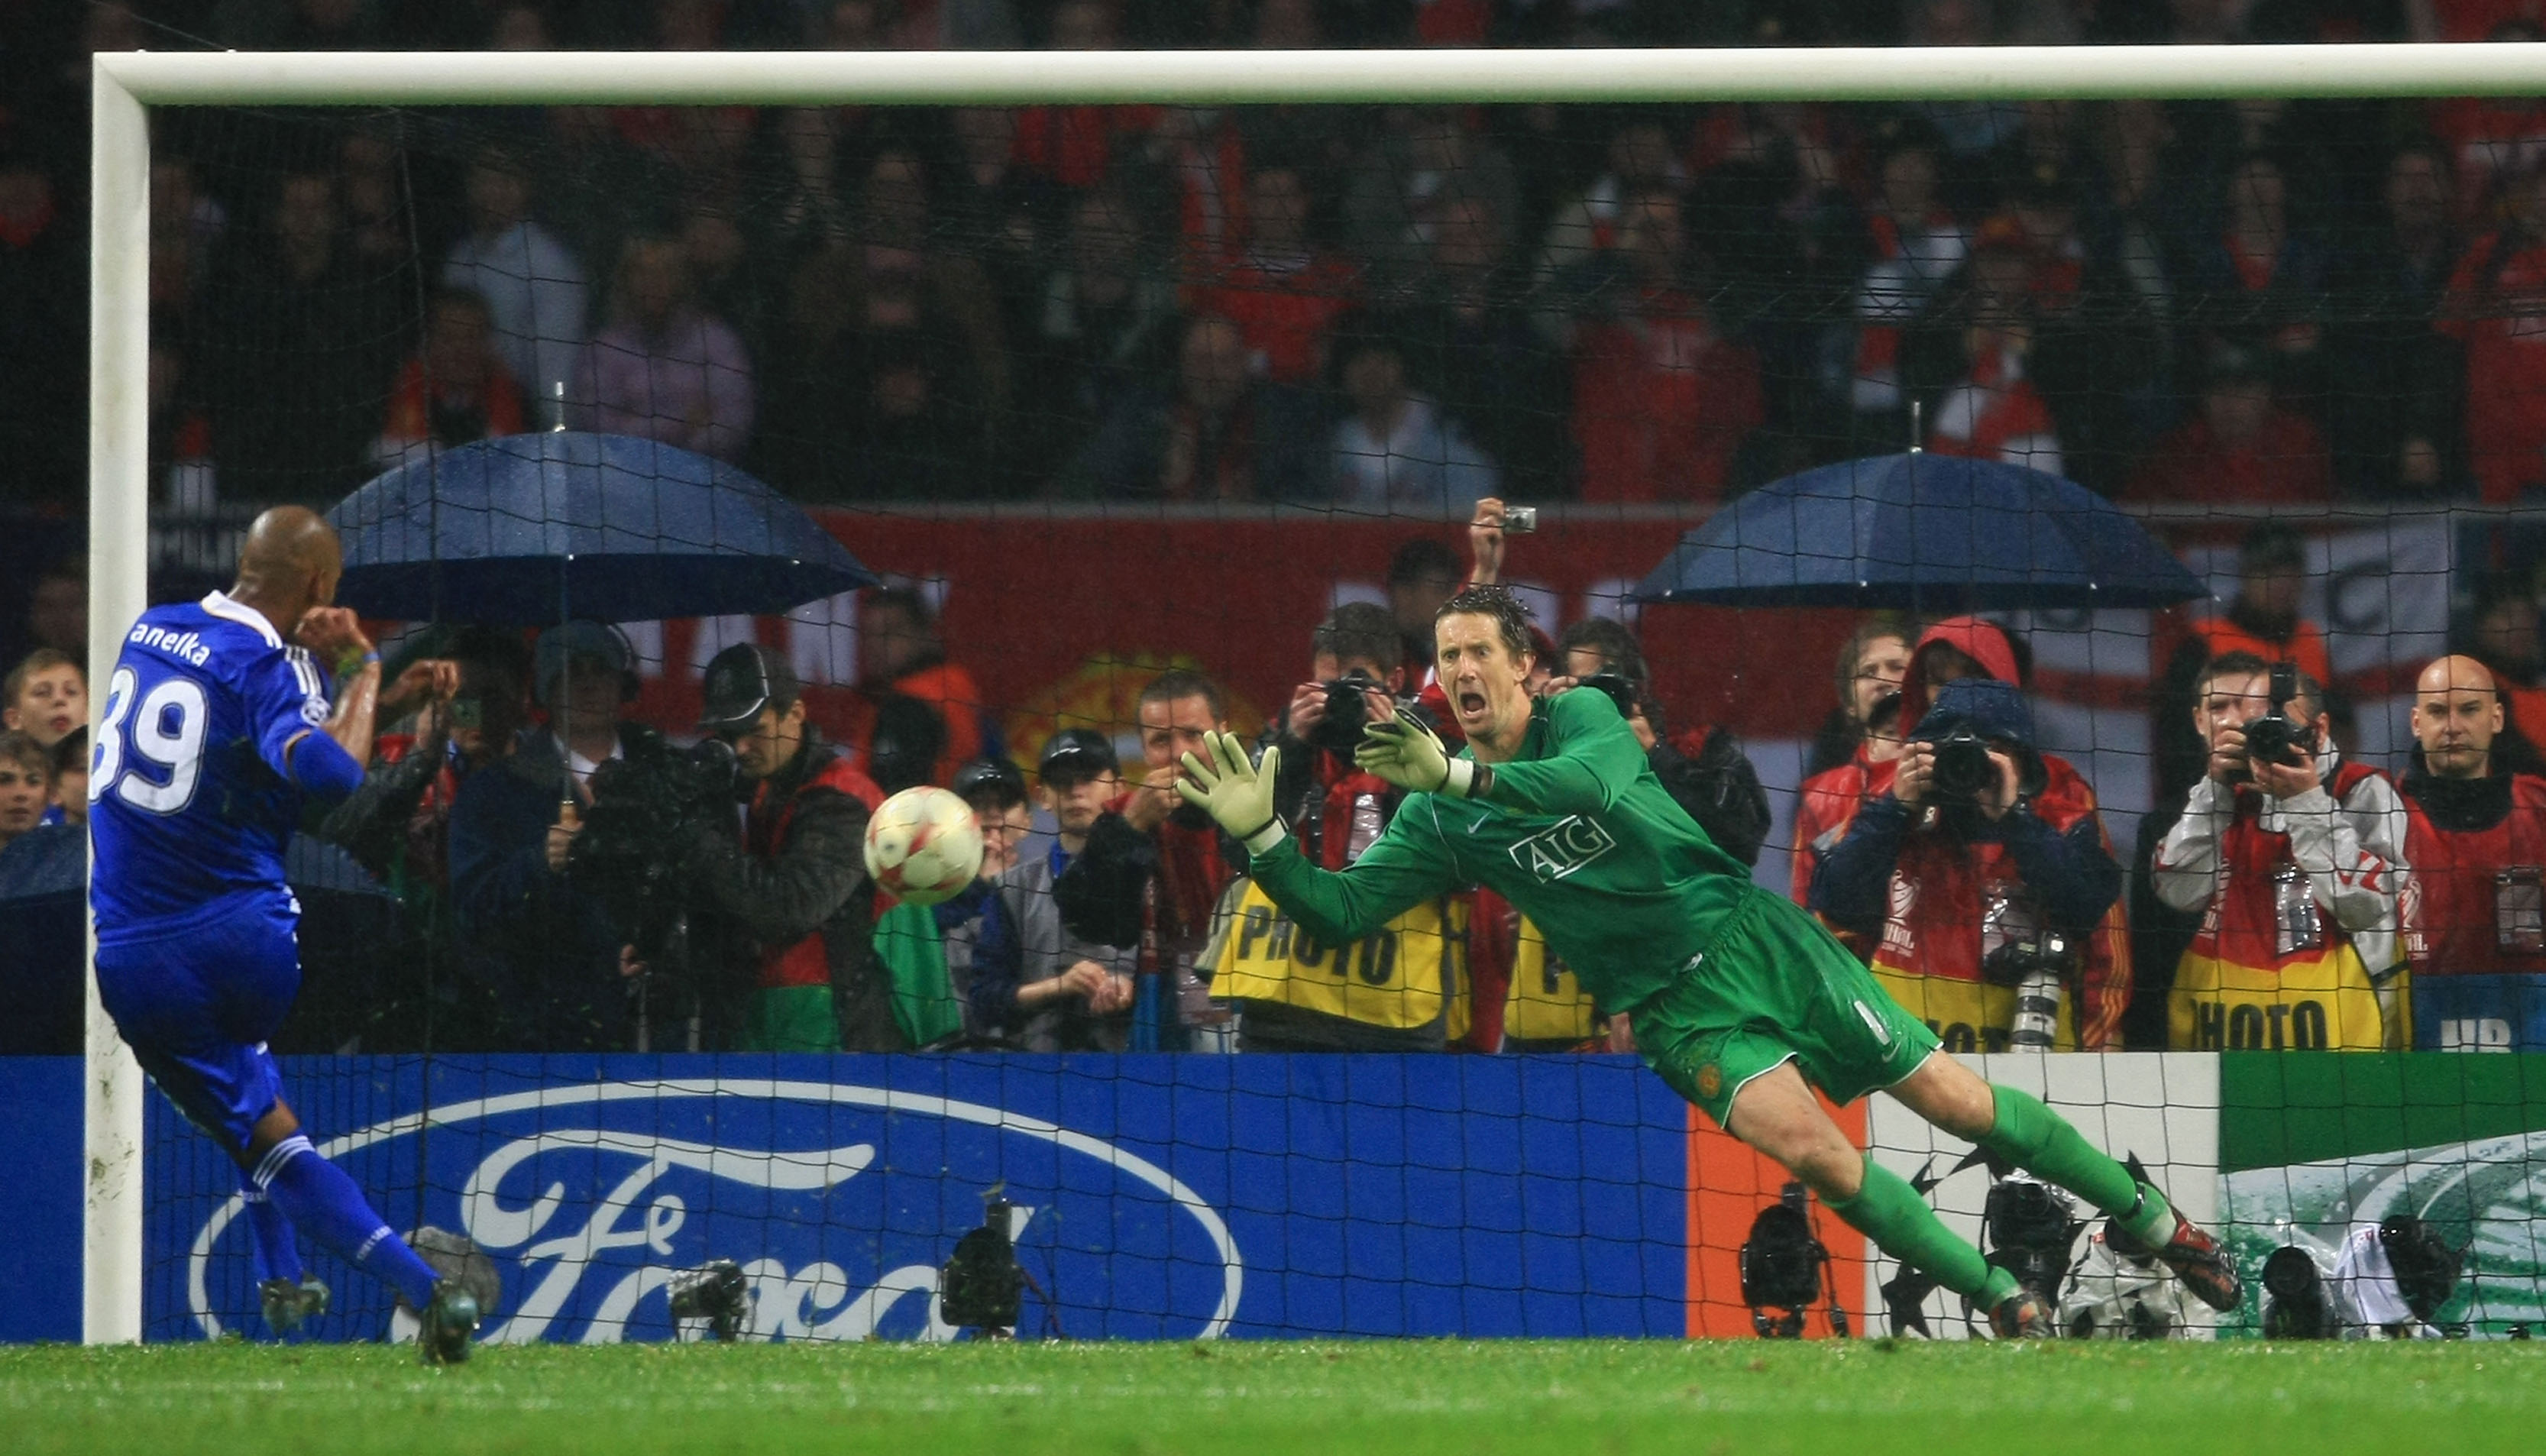 MOSCOW - MAY 21:  Edwin Van der Sar of Manchester United saves the penalty attempt from Ncolas Anelka of Chelsea to win during the UEFA Champions League Final match between Manchester United and Chelsea at the Luzhniki Stadium on May 21, 2008 in Moscow, R